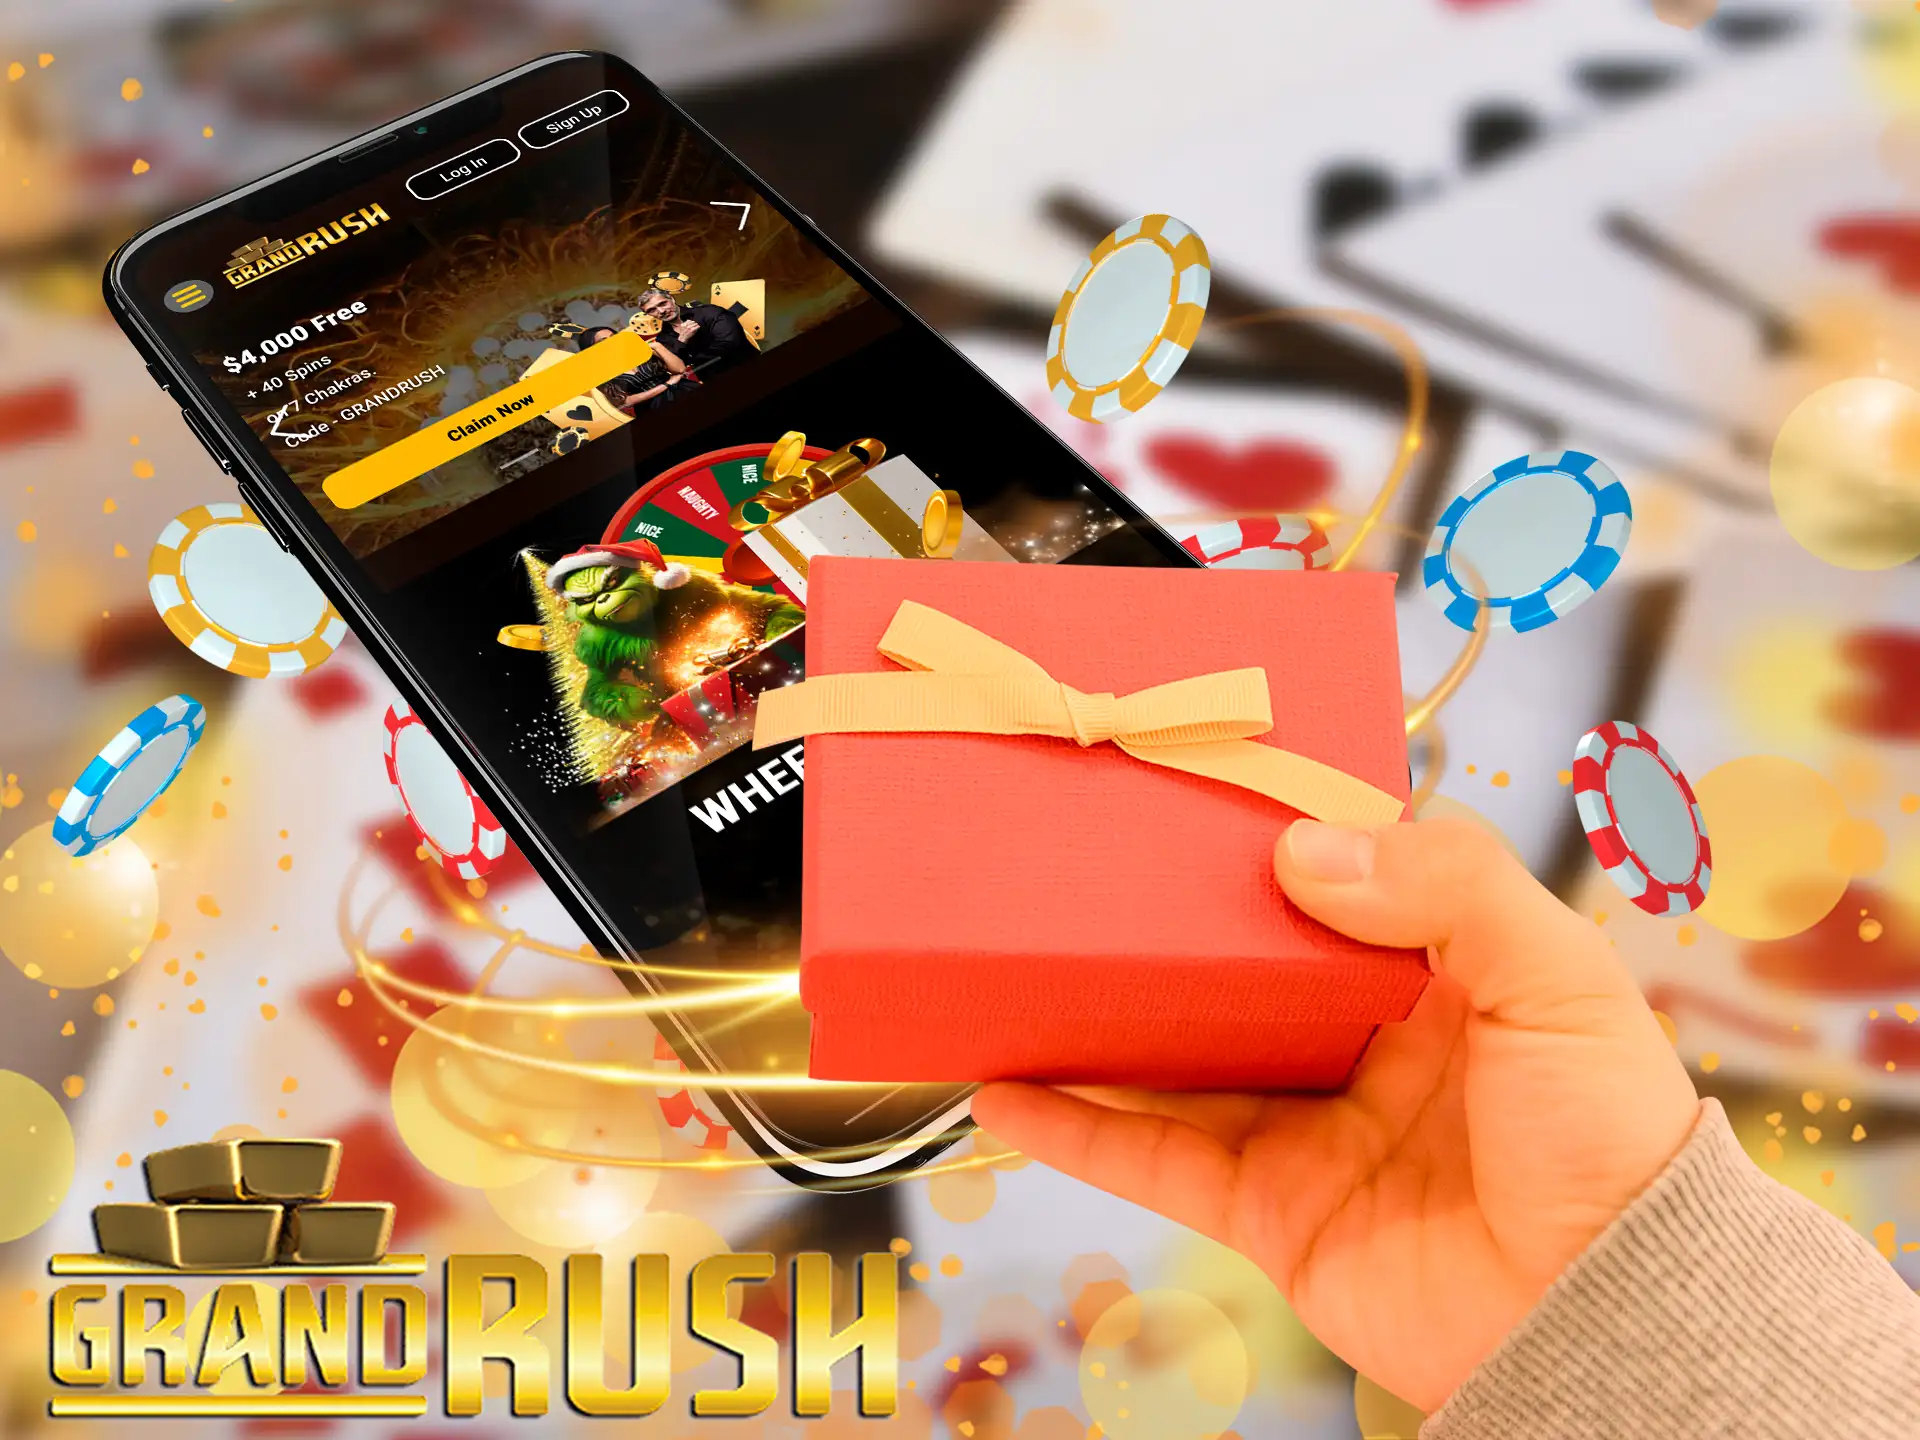 Get a Grand Rush Welcome Bonus of up to AUD 6,000 and 40 Free Spins.